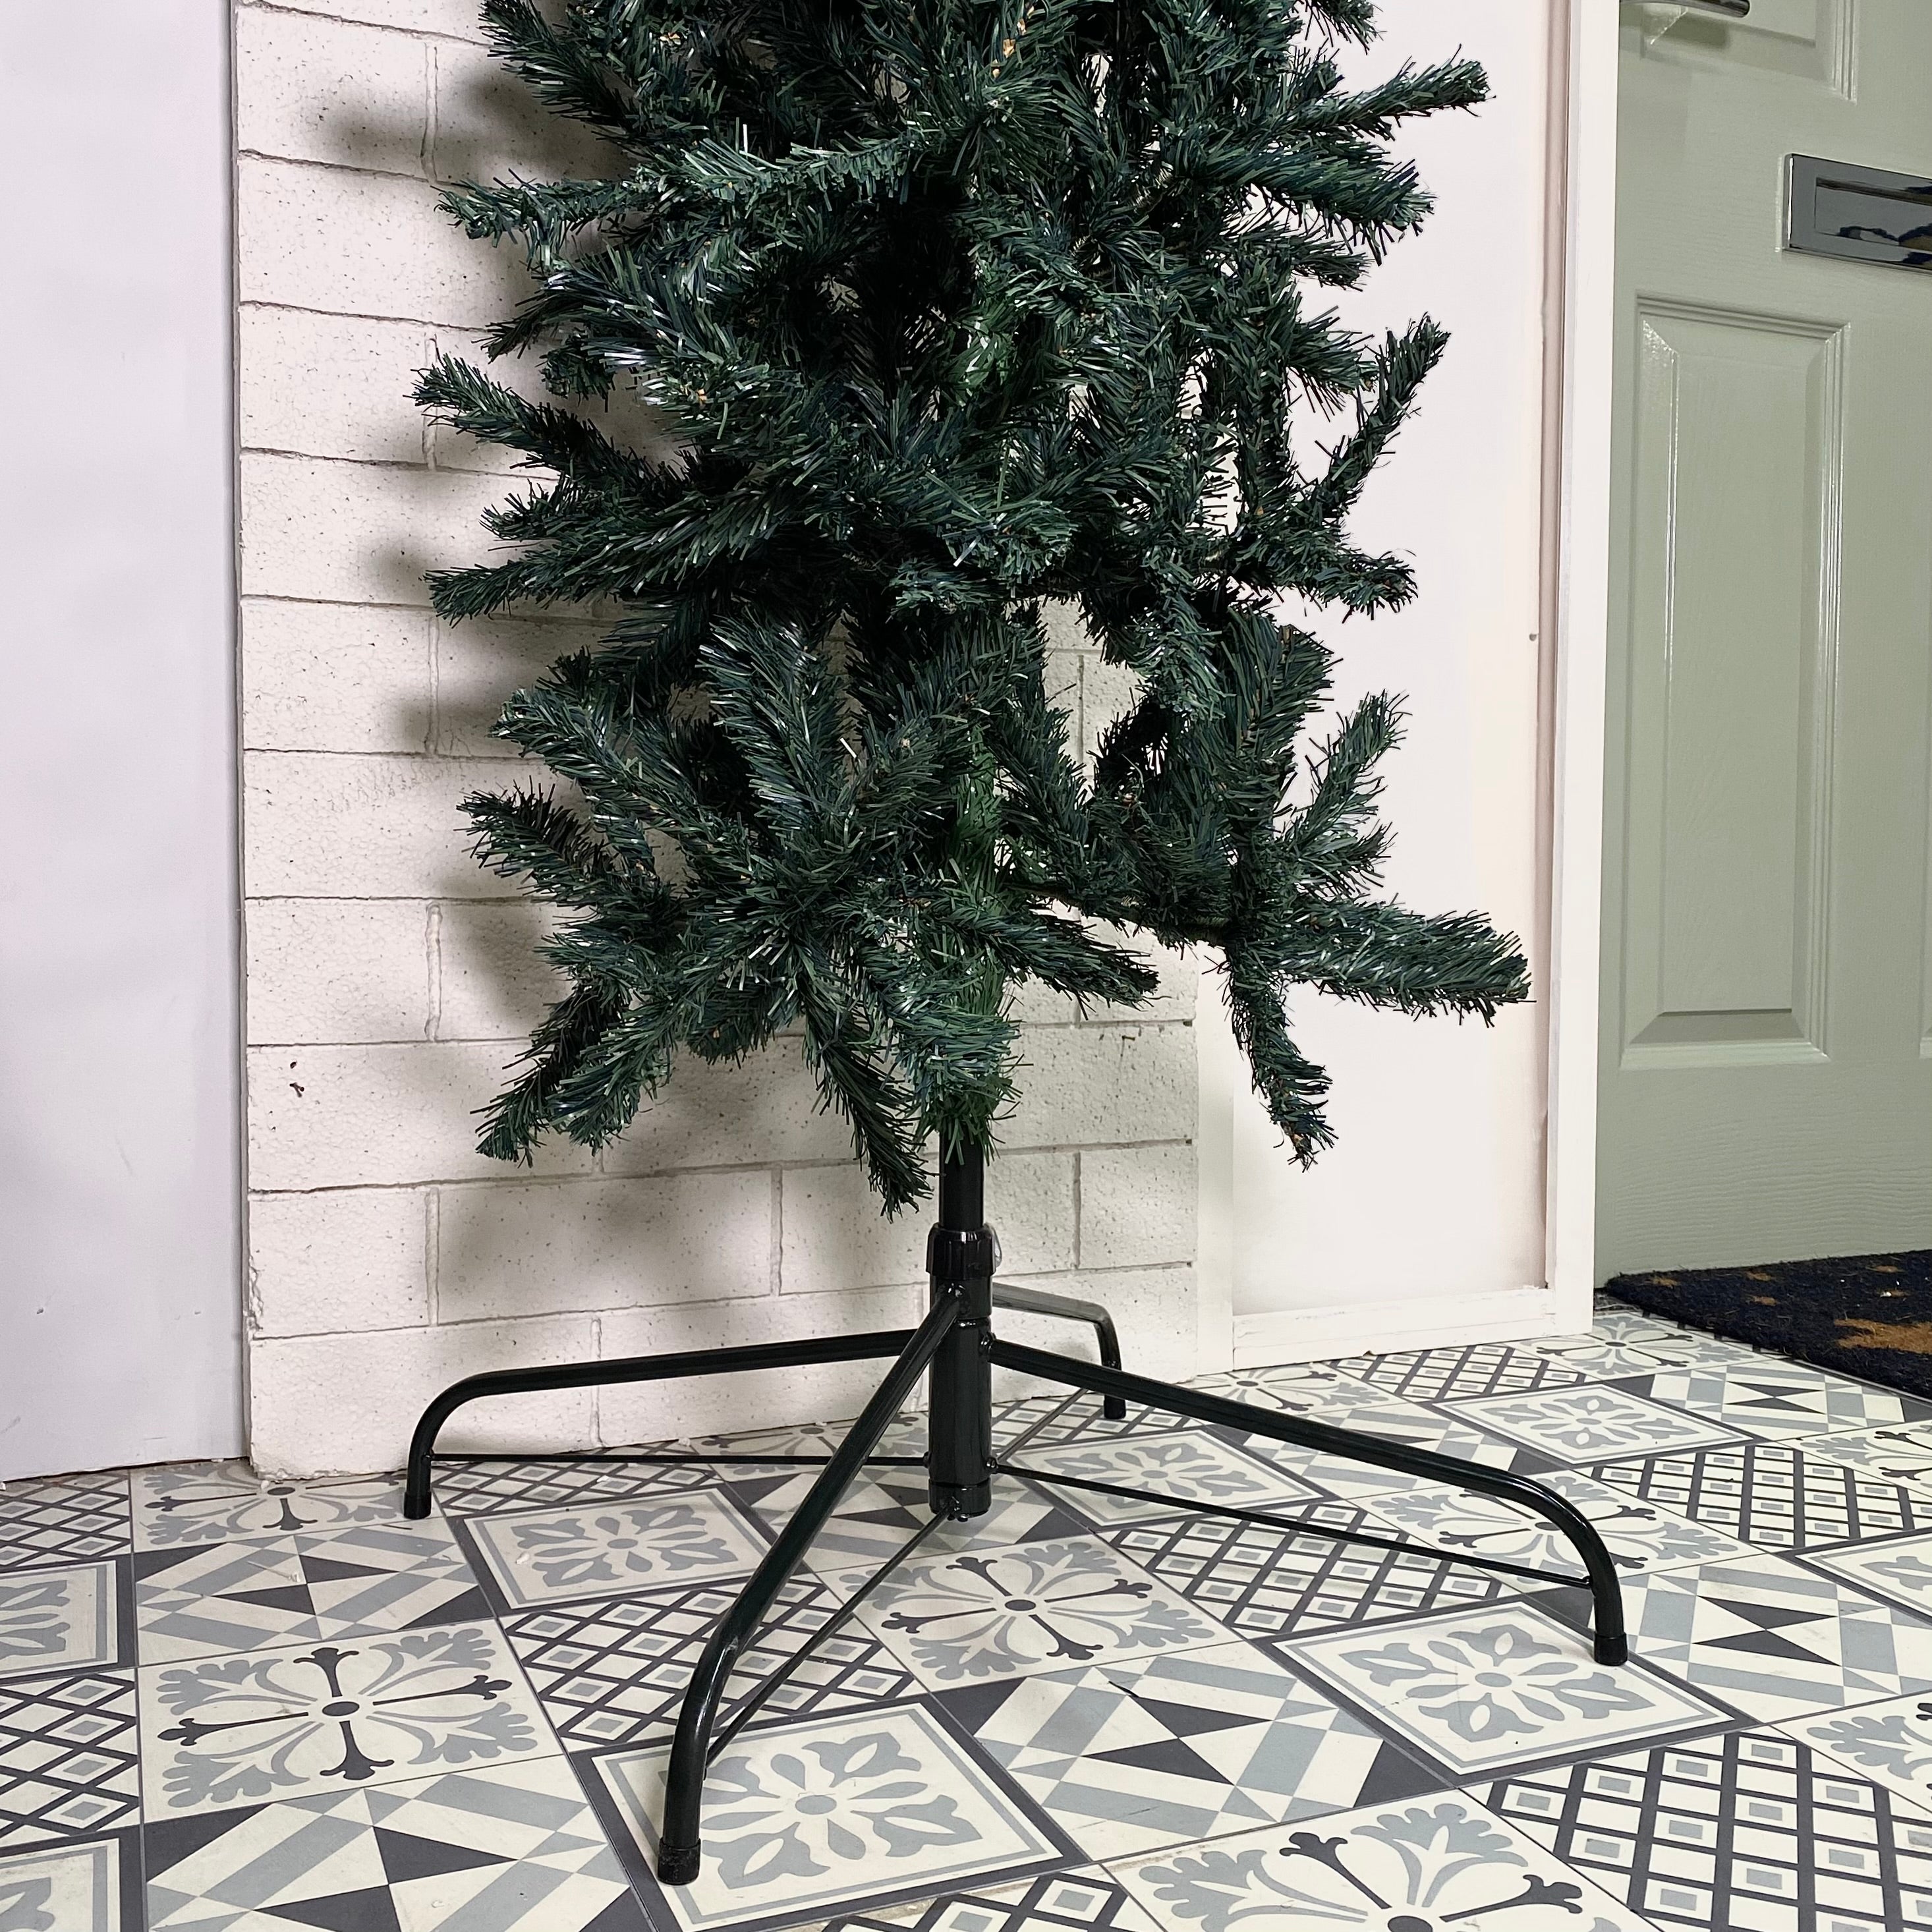 8ft (2.4m) Tall Indoor Outdoor Christmas Tree Arched and Flat Option Included in Green